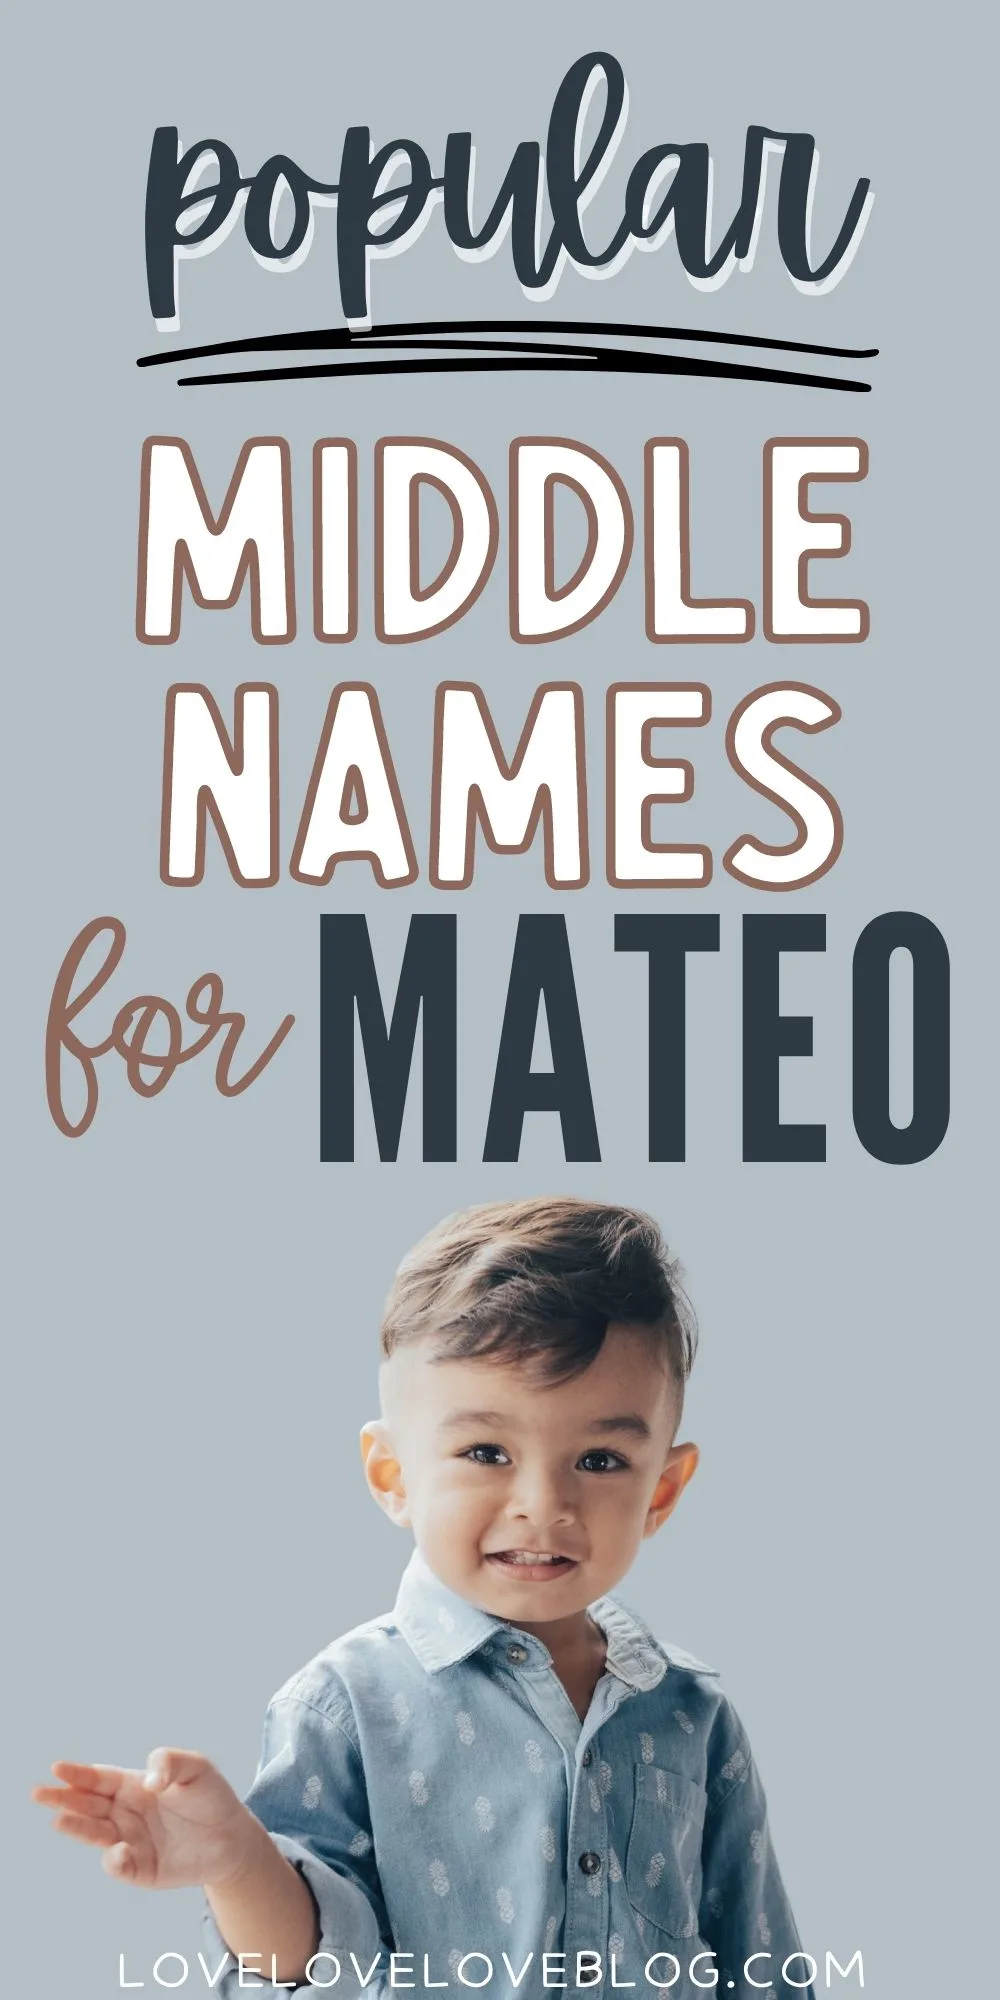 Pinterest graphic with text and photo of boy in button down smiling against gray background.